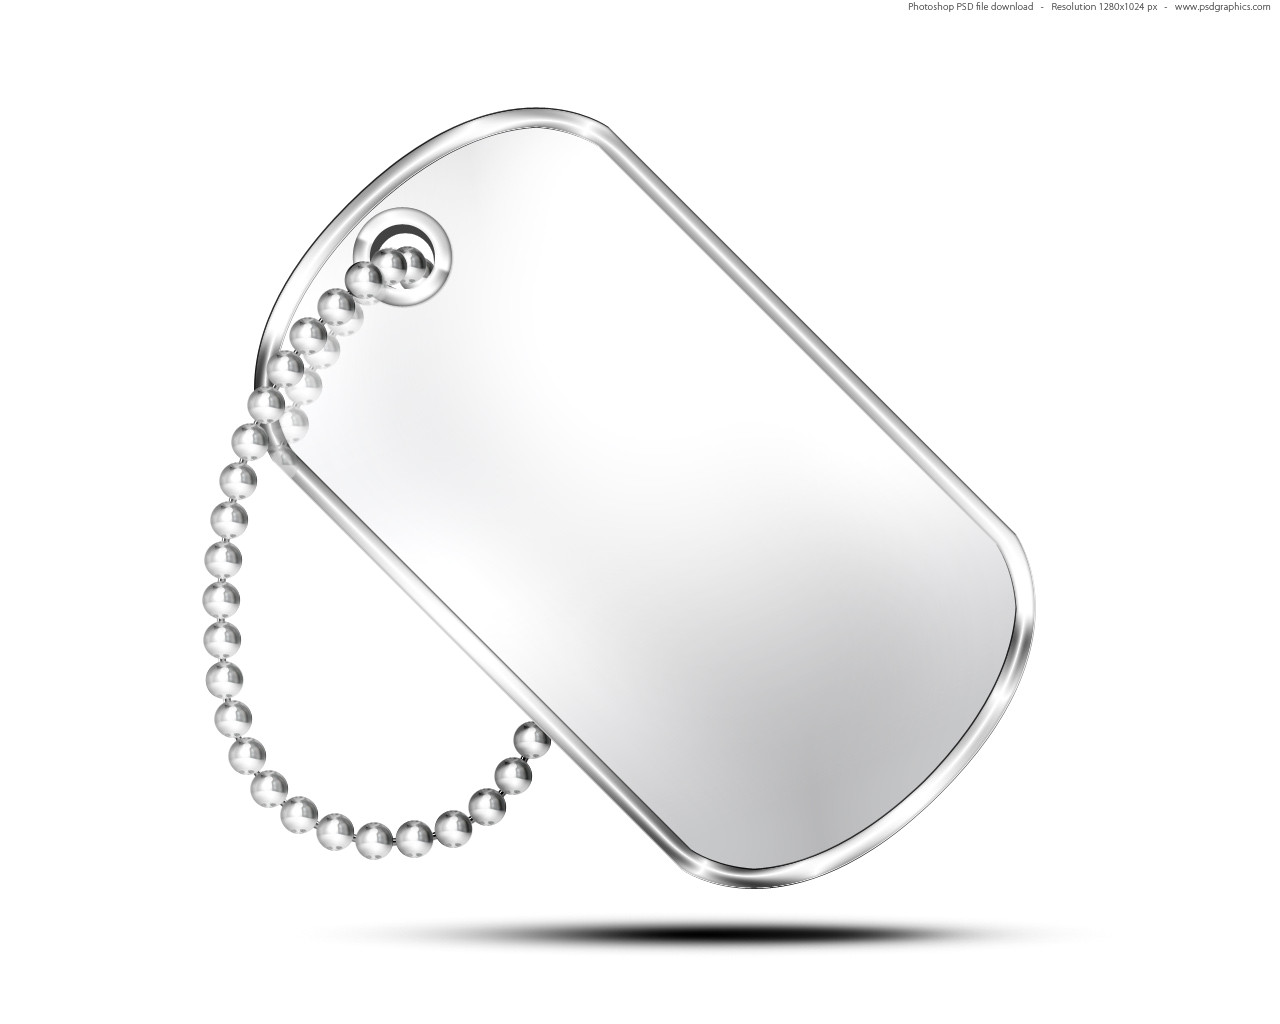 military dog tag psd icon